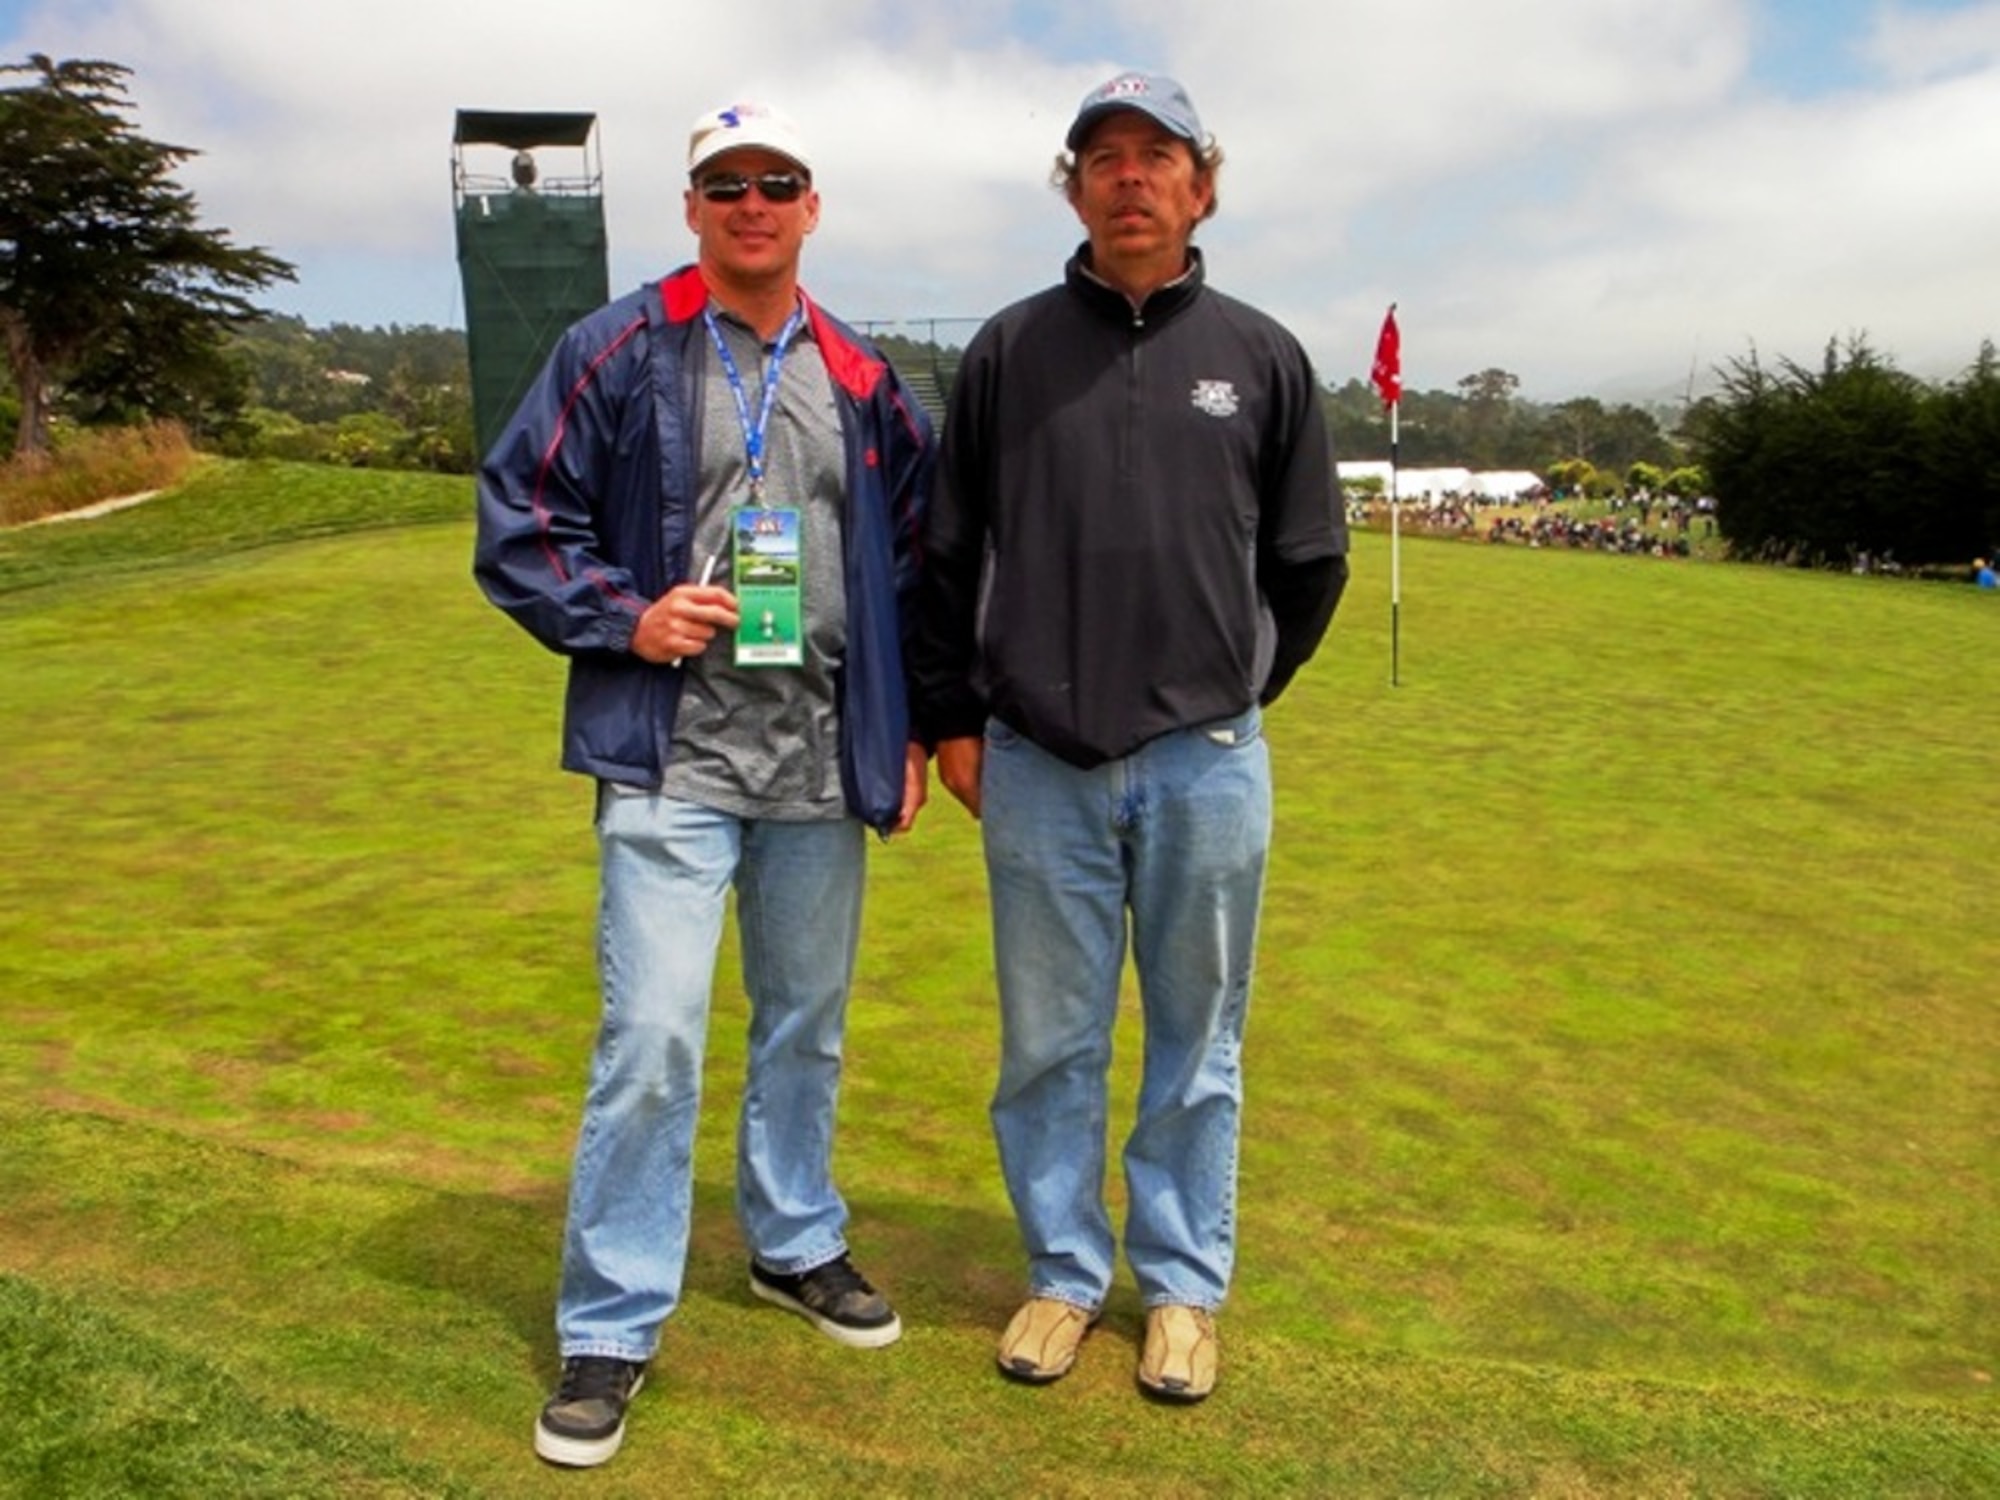 Master Sgt. Bill Fortenberry, 325th Air Control Squadron first sergeant, left, and his brother, Tim Fortenberry, at the 2010 U.S. Open Golf Championship in Pebble Beach, Calif. Sergeant Fortenberry won an all-expense paid trip to the event in a drawing at the 7th Annual Bob Hope Memorial Classic Golf Tournament in Ft. Walton Beach, Fla. The proceeds from the drawing and the tournament benefit the Air Force Enlisted Village. (Courtesy photo)